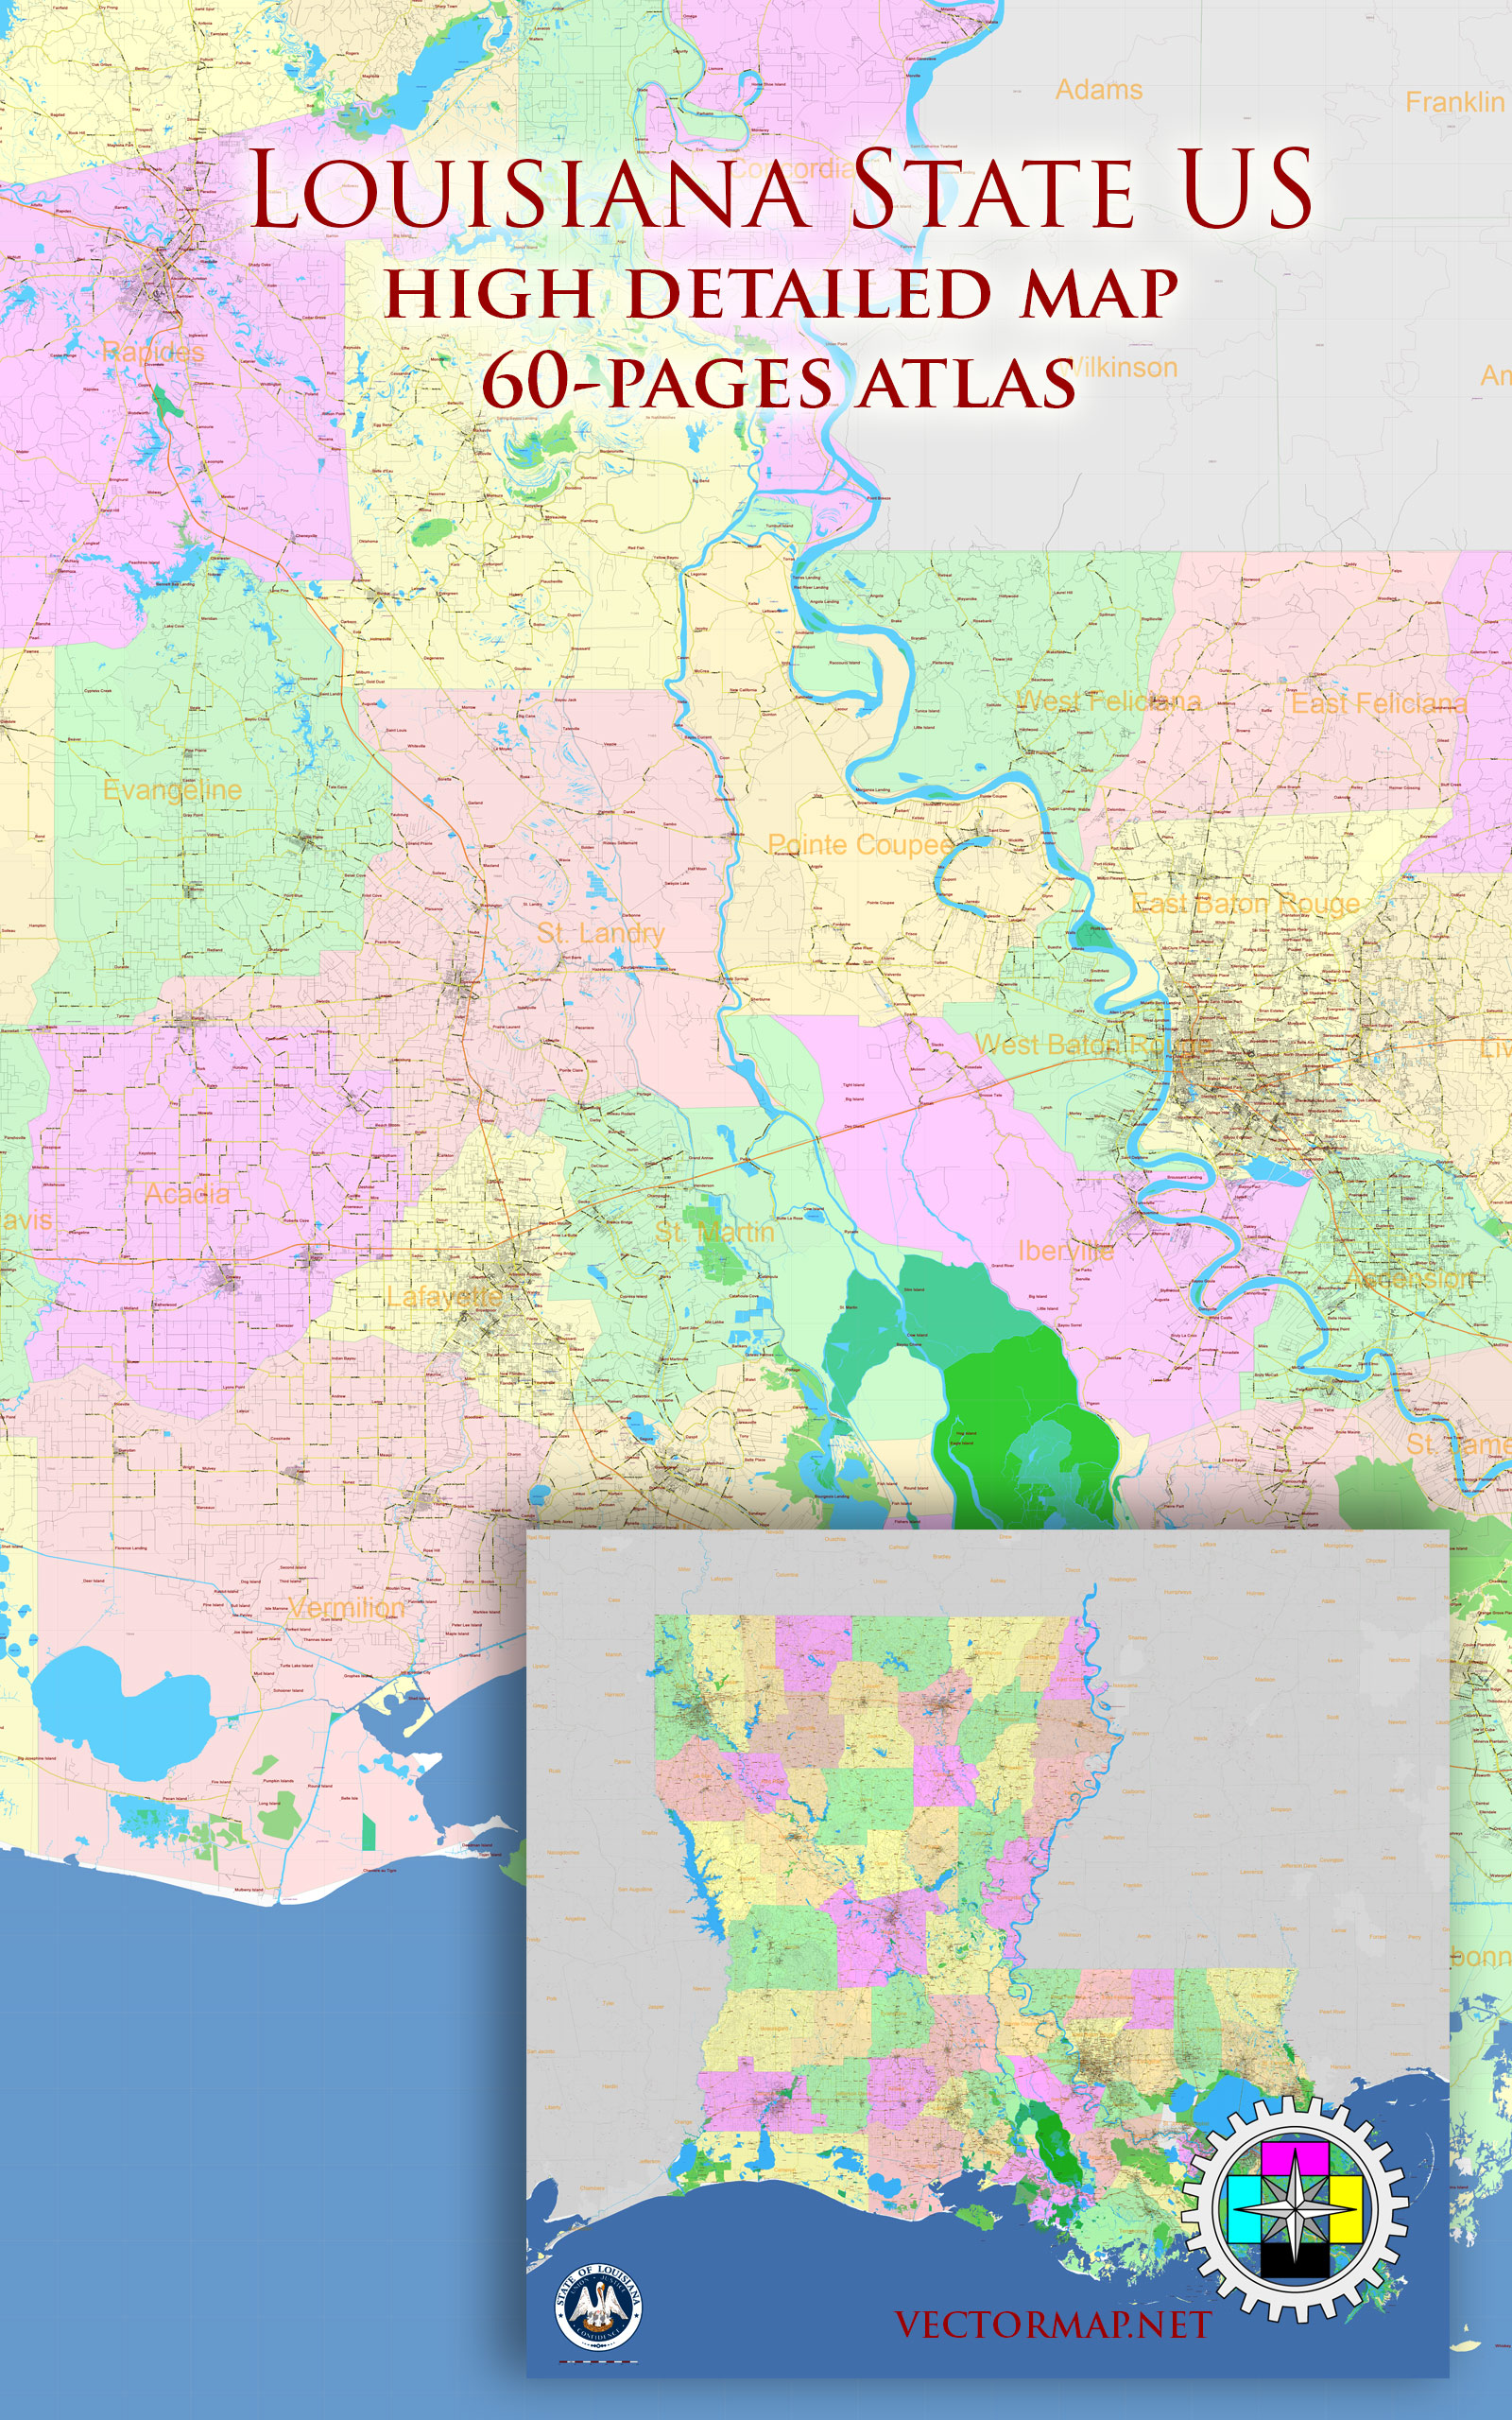 Louisiana State US Tourist Road Map multi-page atlas, contains 60 pages vector PDF